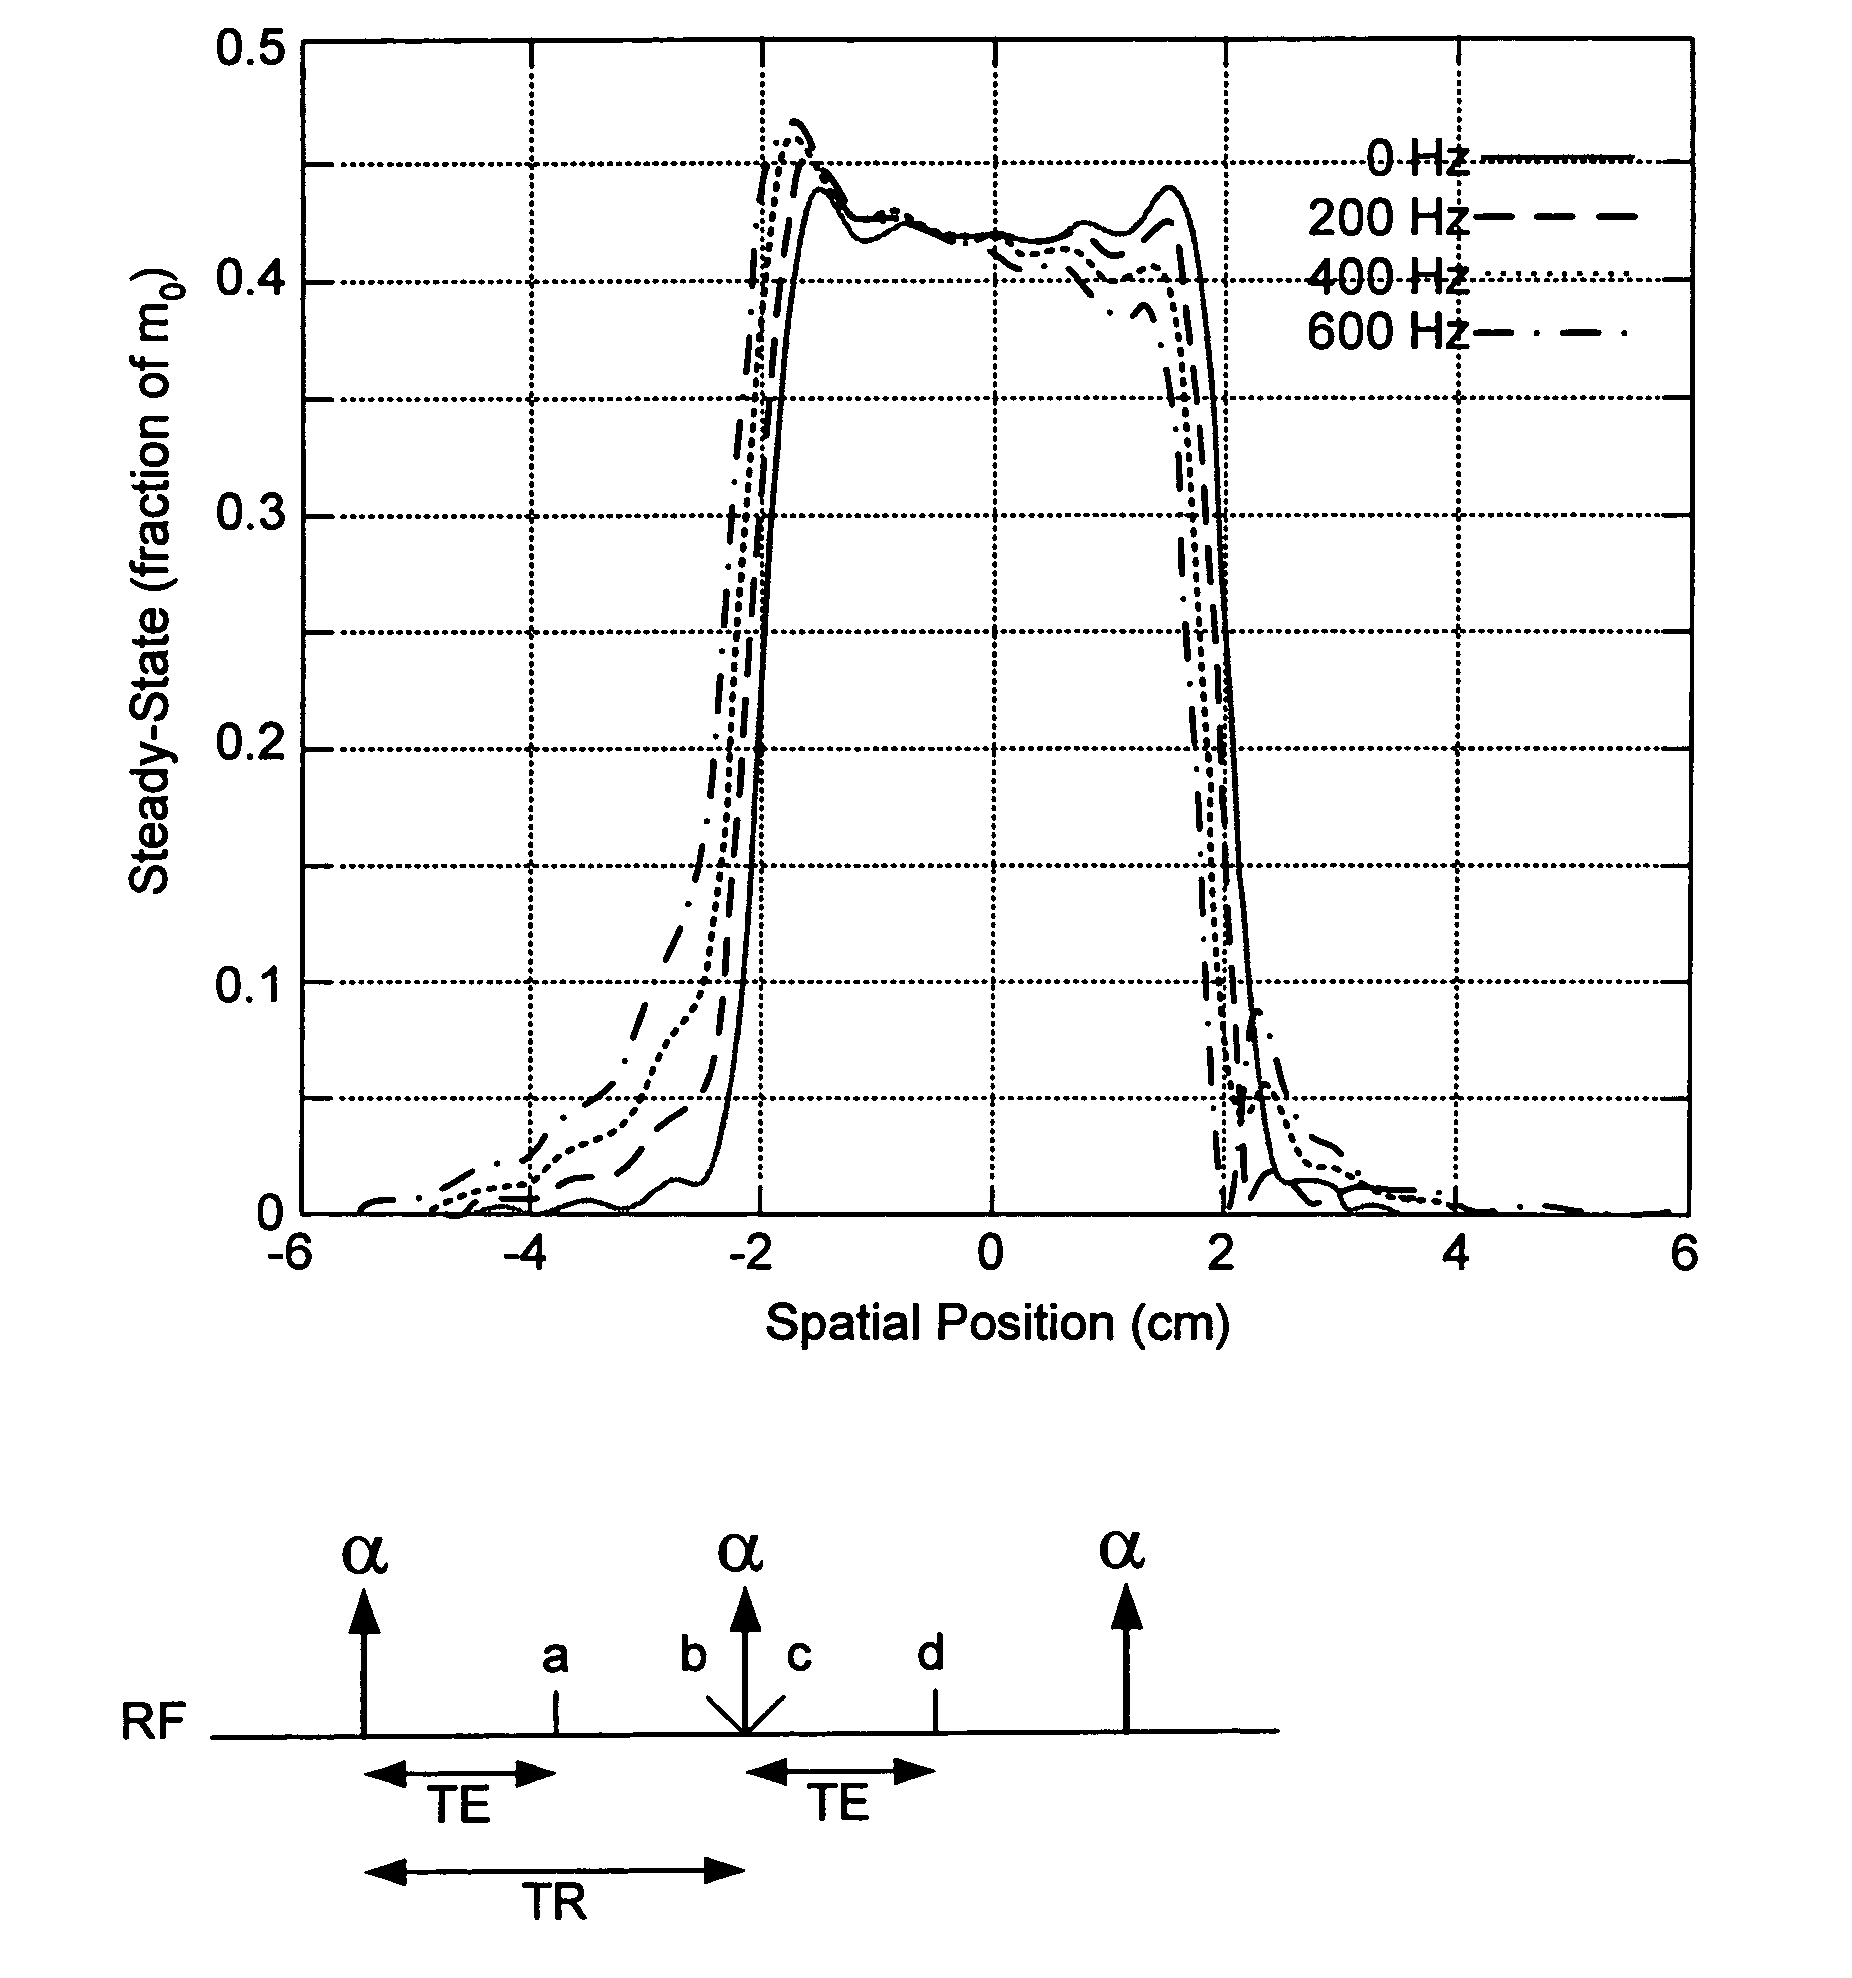 Reduced-time variable rate excitation pulses for rapid MRI